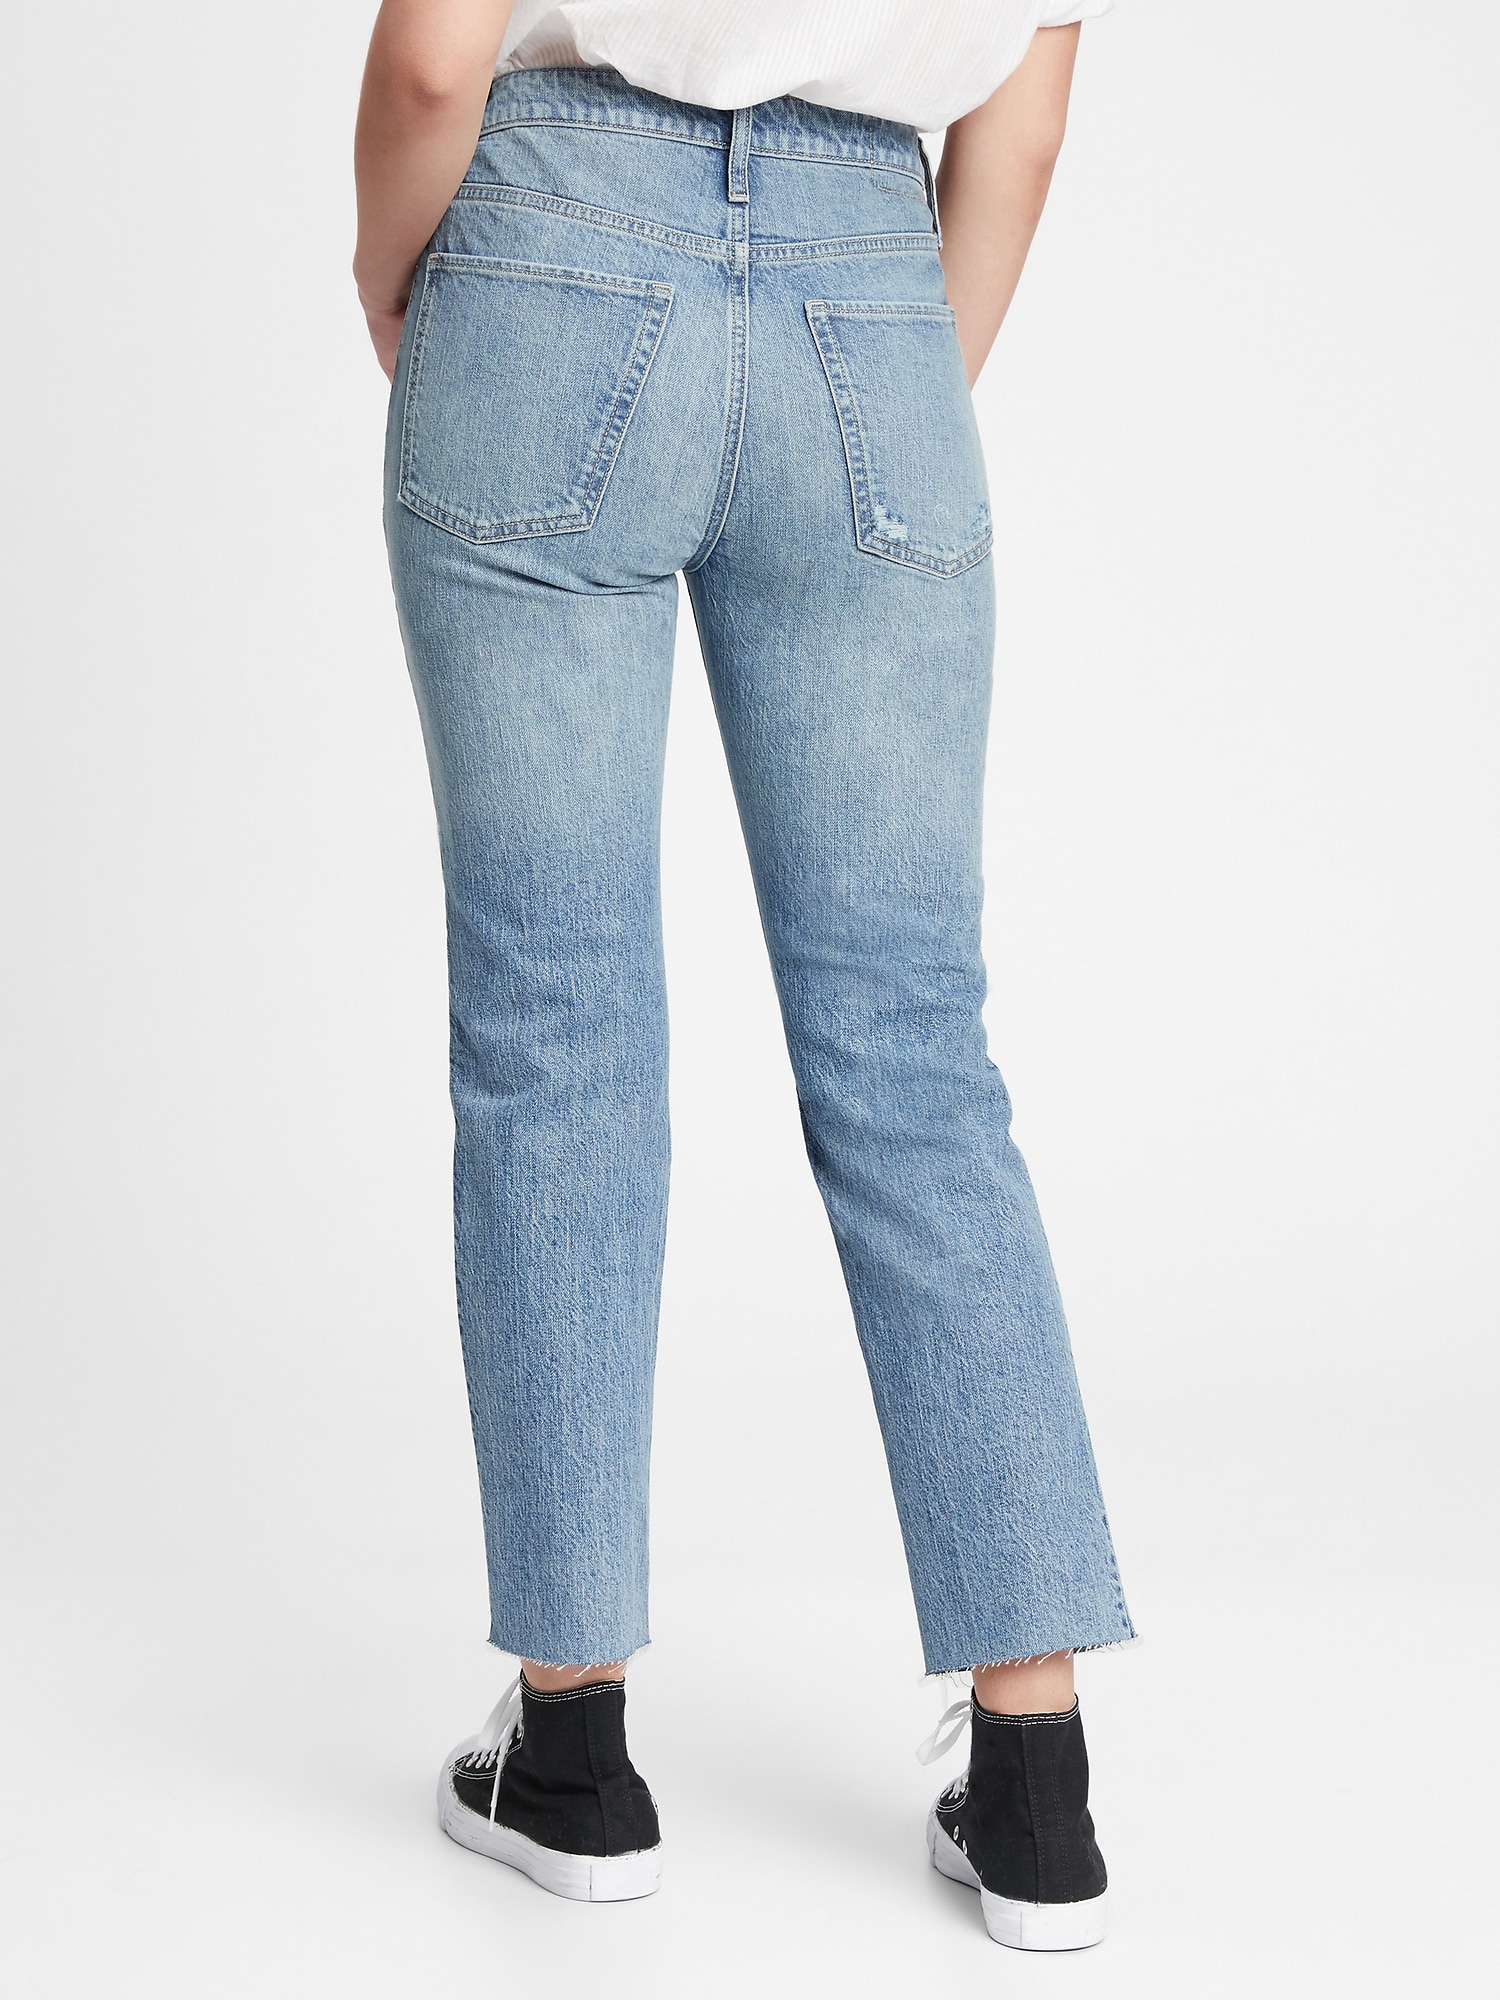 Mid Rise Destructed Slim Boyfriend Jeans with Washwell | Gap Factory